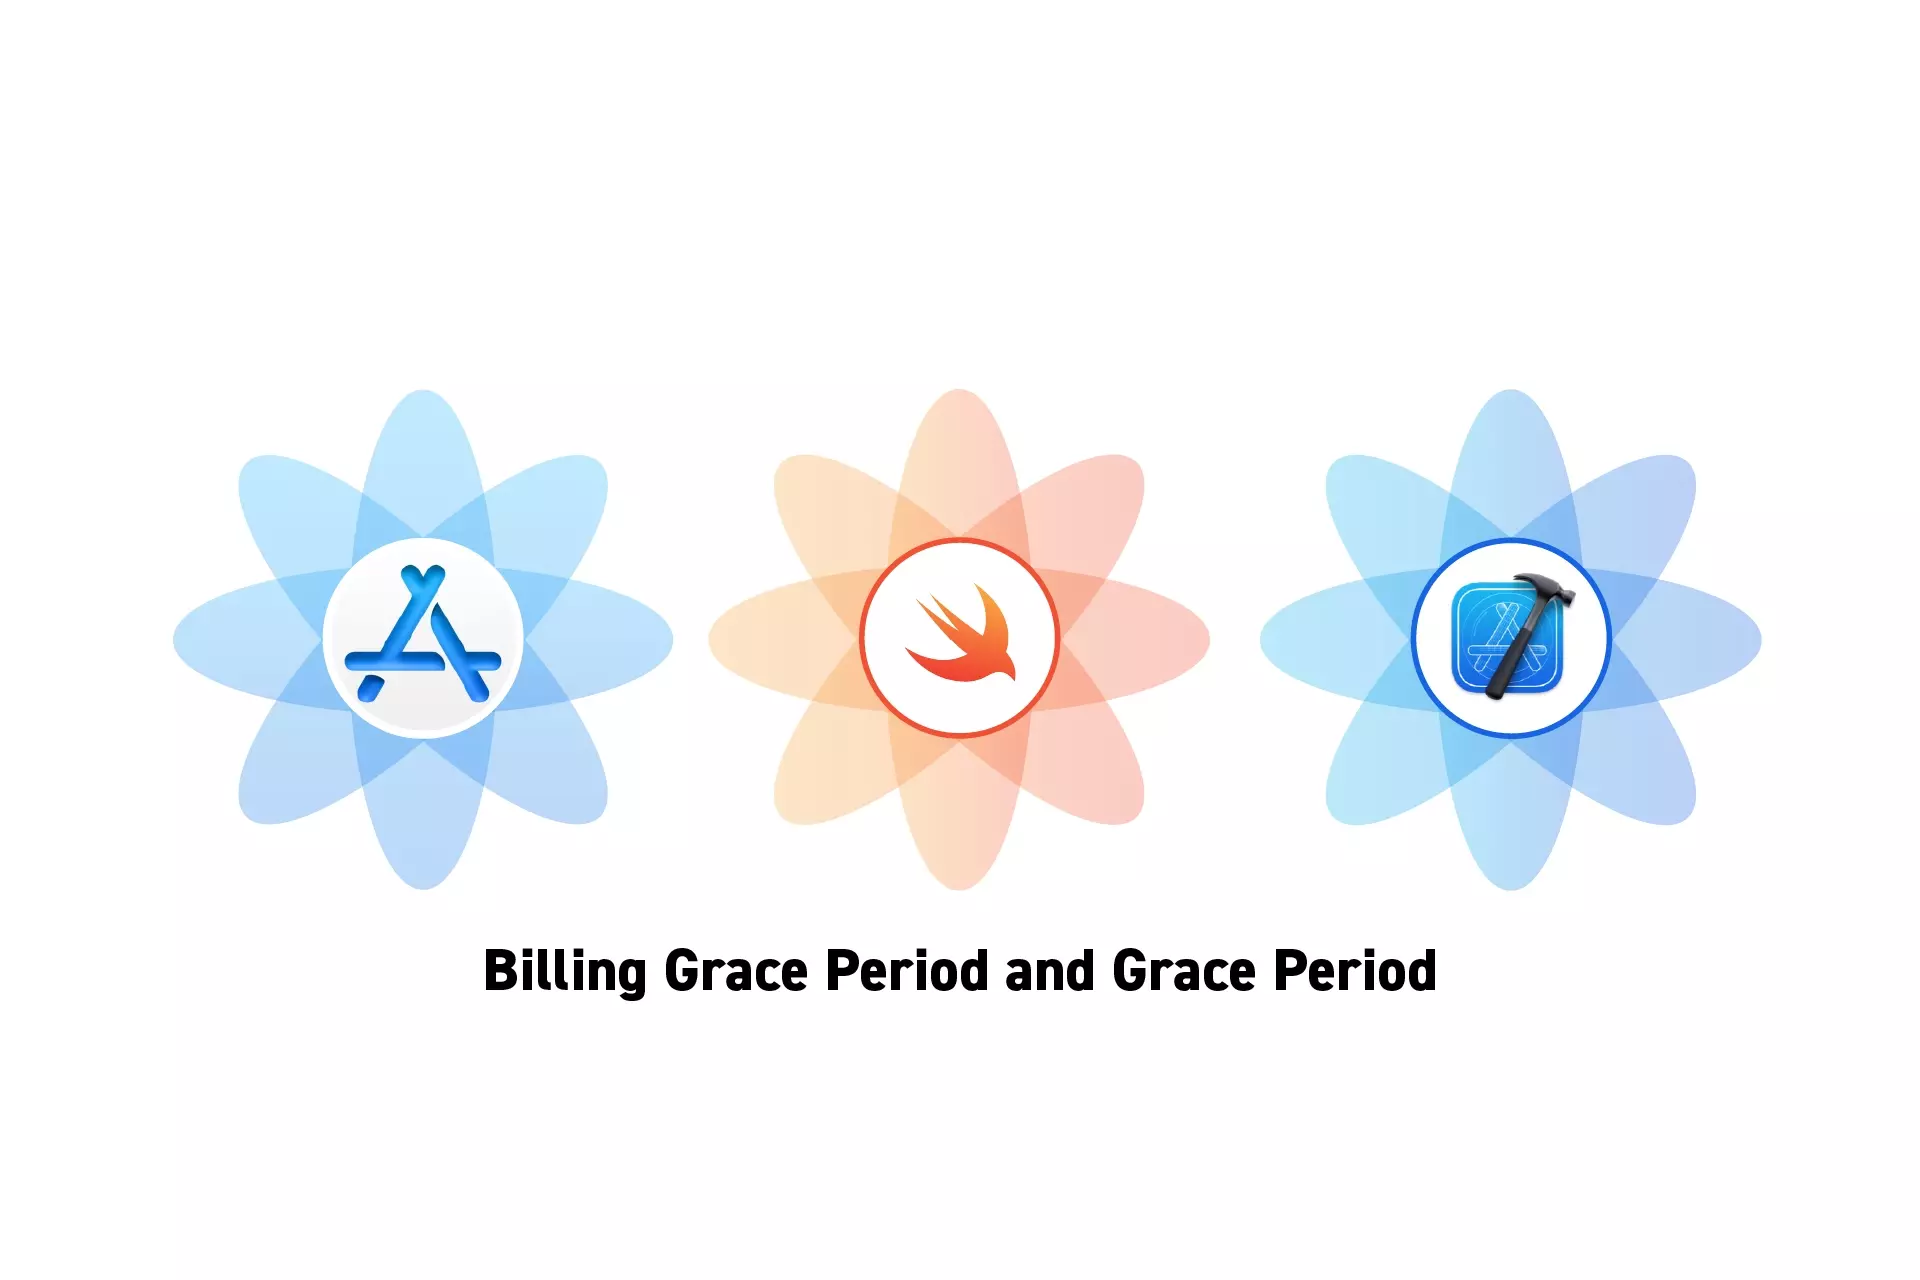 Three flowers that represent StoreKit, Swift and XCode side by side. Beneath them sits the text “Billing Grace Period and Grace Period.”